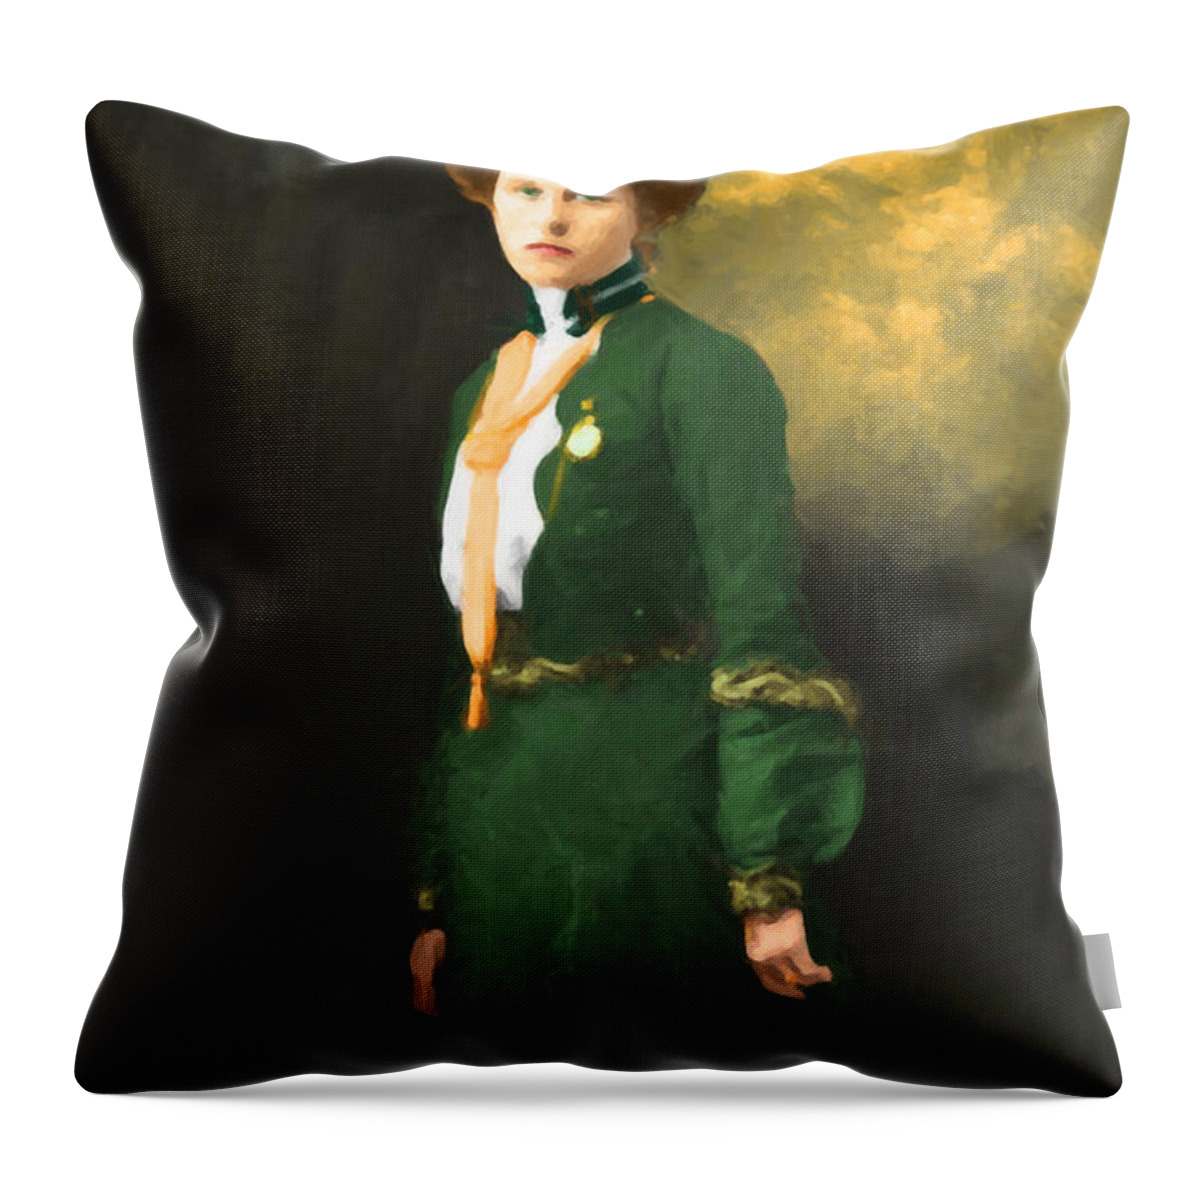 Etta Place Throw Pillow featuring the photograph Etta Place 20130515 by Wingsdomain Art and Photography